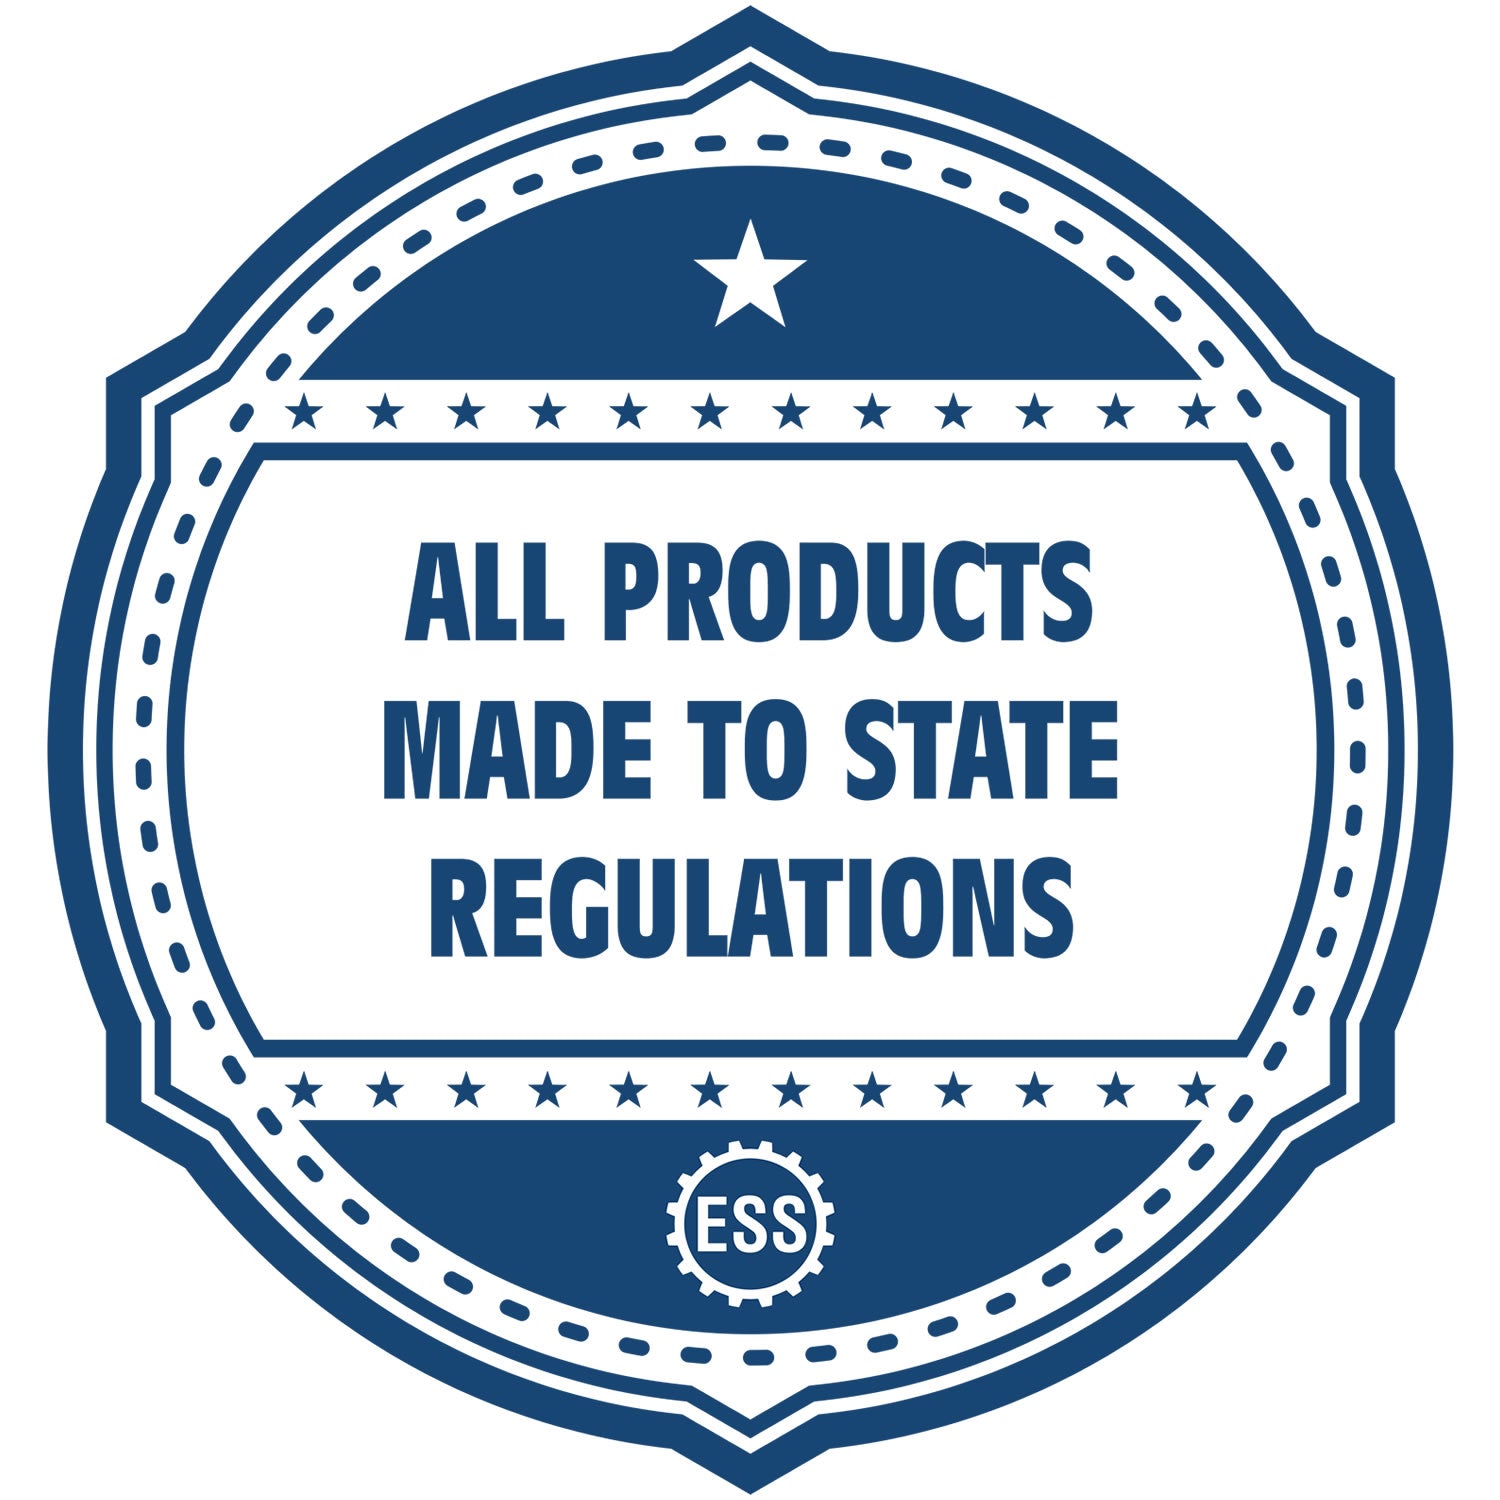 An icon or badge element for the State of Kentucky Extended Long Reach Landscape Architect Seal Embosser showing that this product is made in compliance with state regulations.